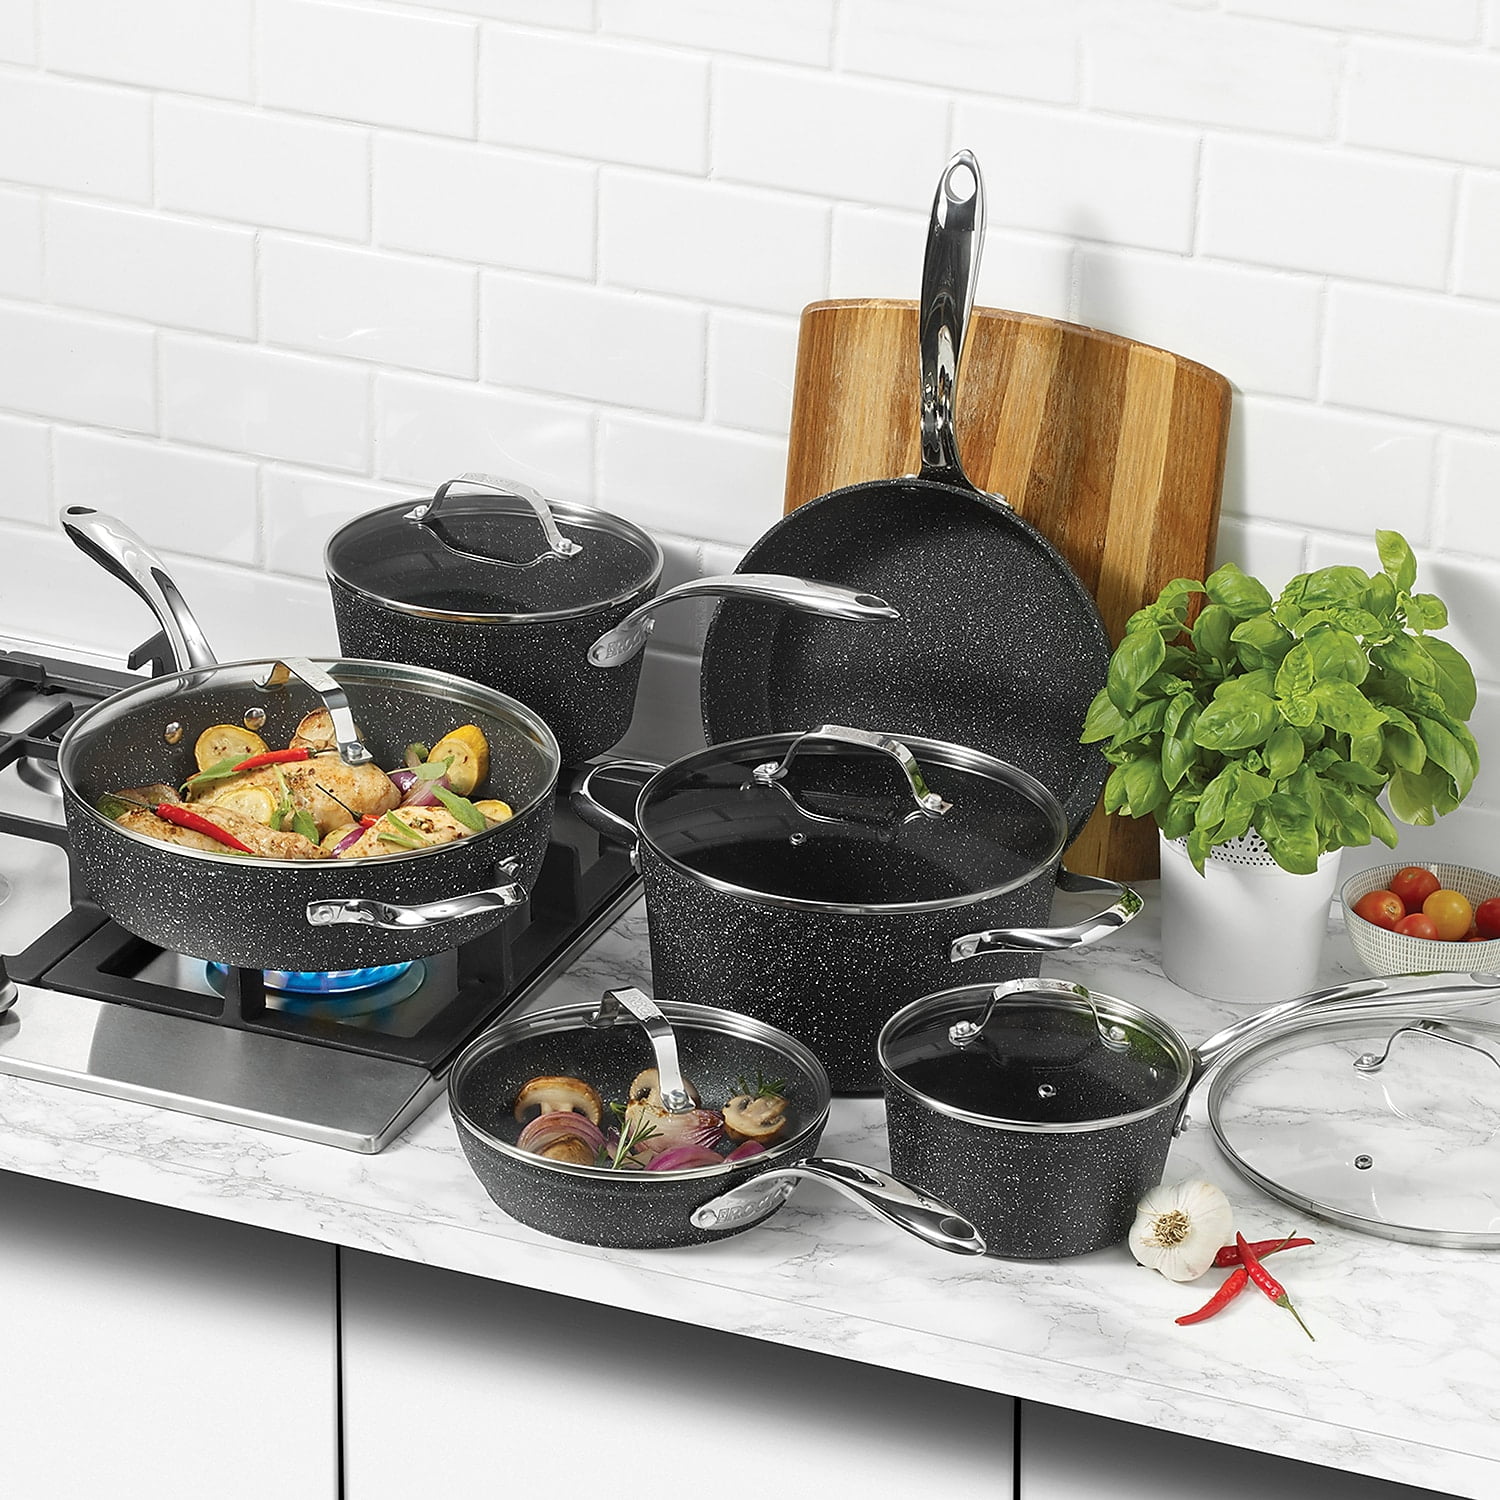 The Rock by Starfrit 12-Piece Cookware Set - Sam's Club